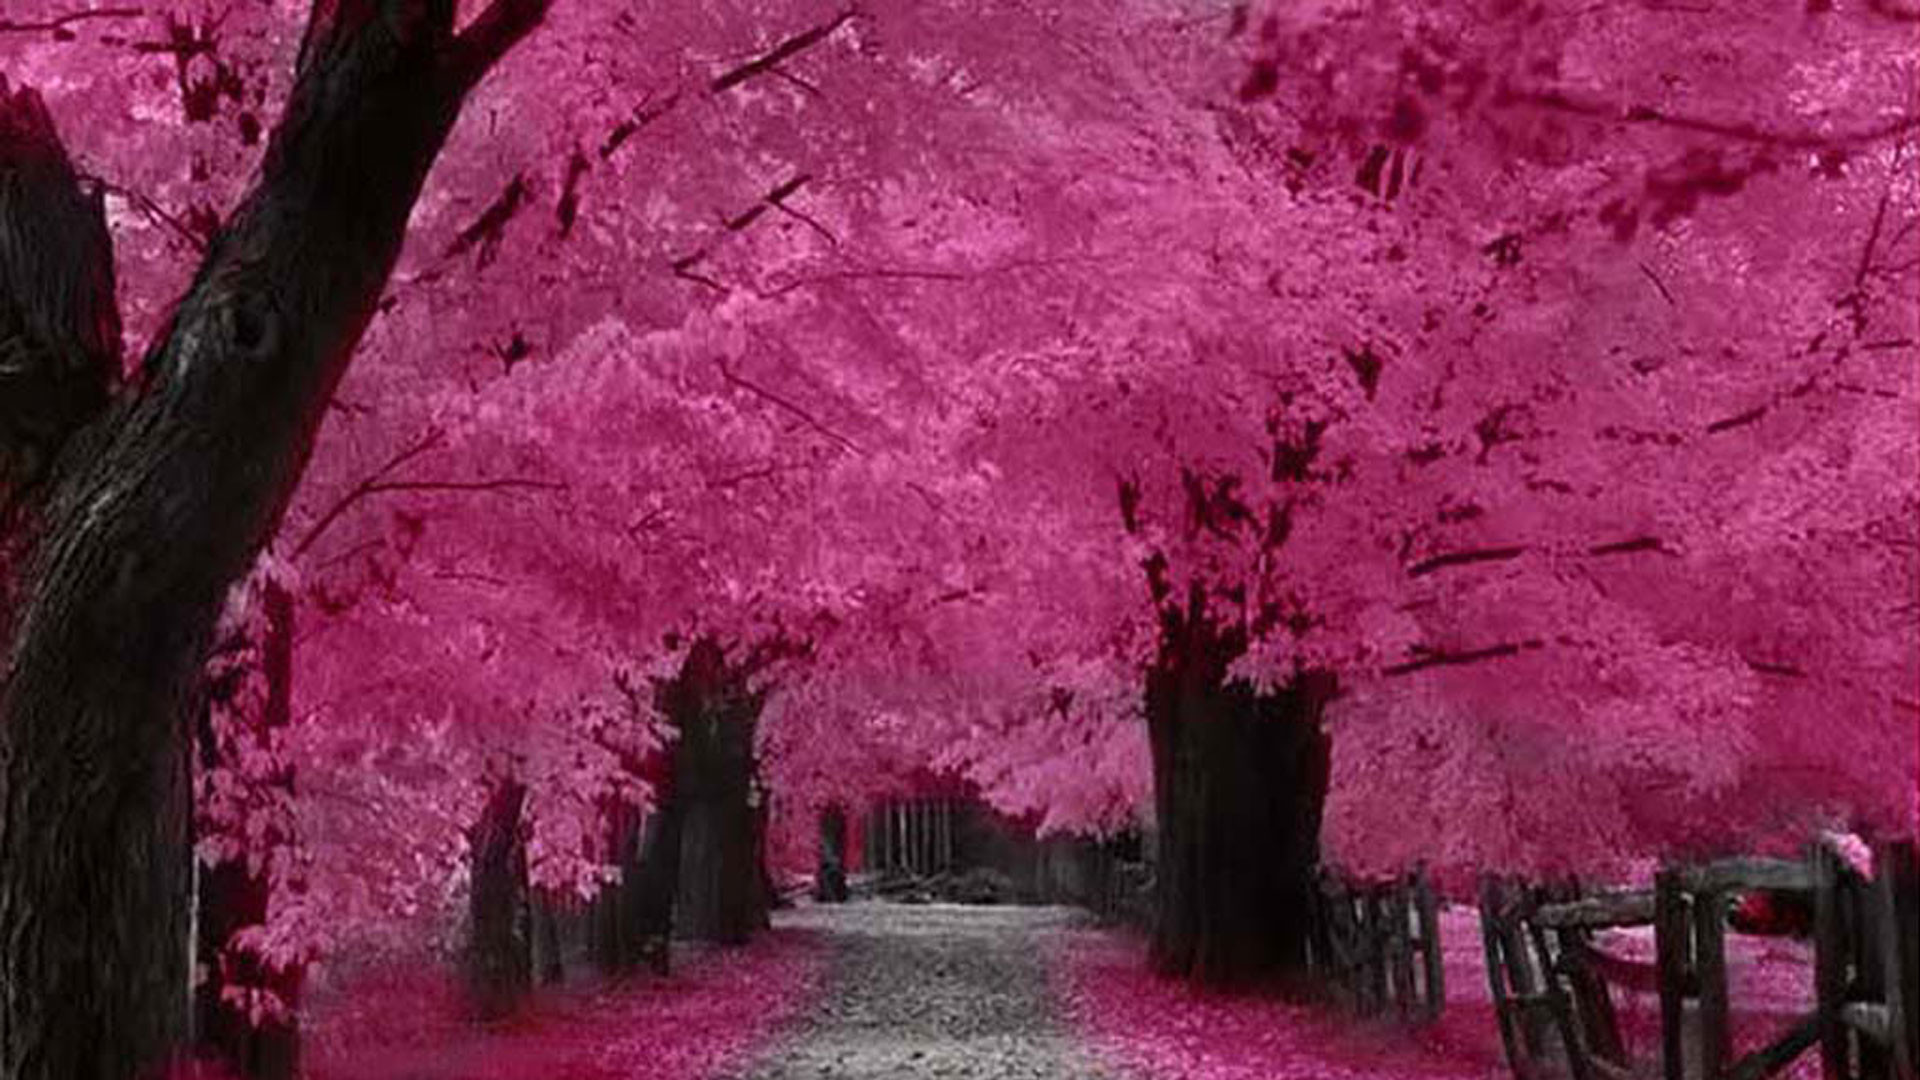 1920x1080 ... hd wallpaper; 14 anese cherry blossom images group ...